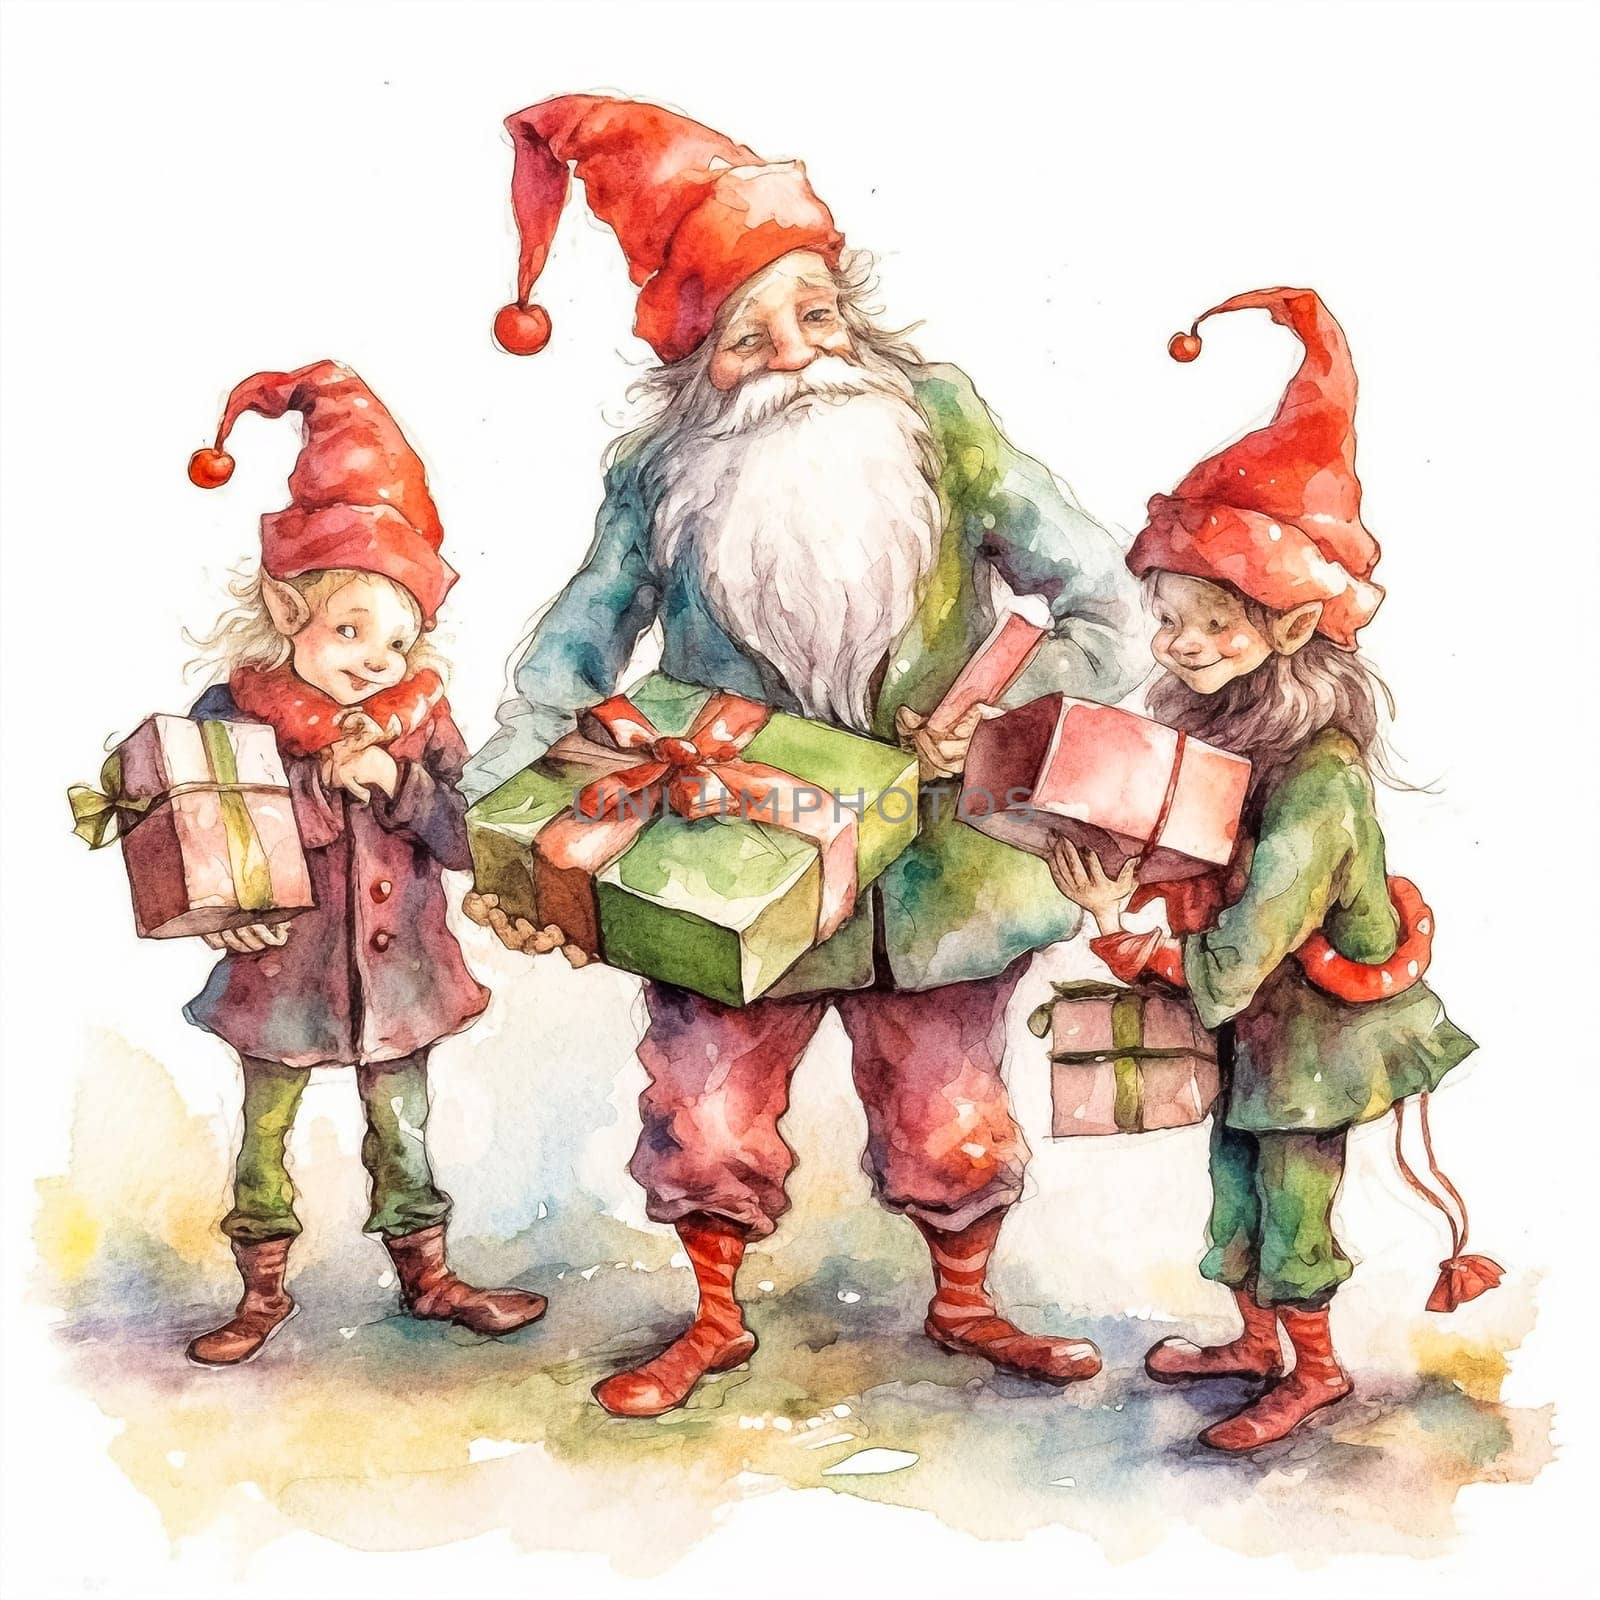 Whimsical watercolor portrays Santa's helper gnomes, bearing gifts a festive celebration of Christmas and New Year with charming holiday spirit